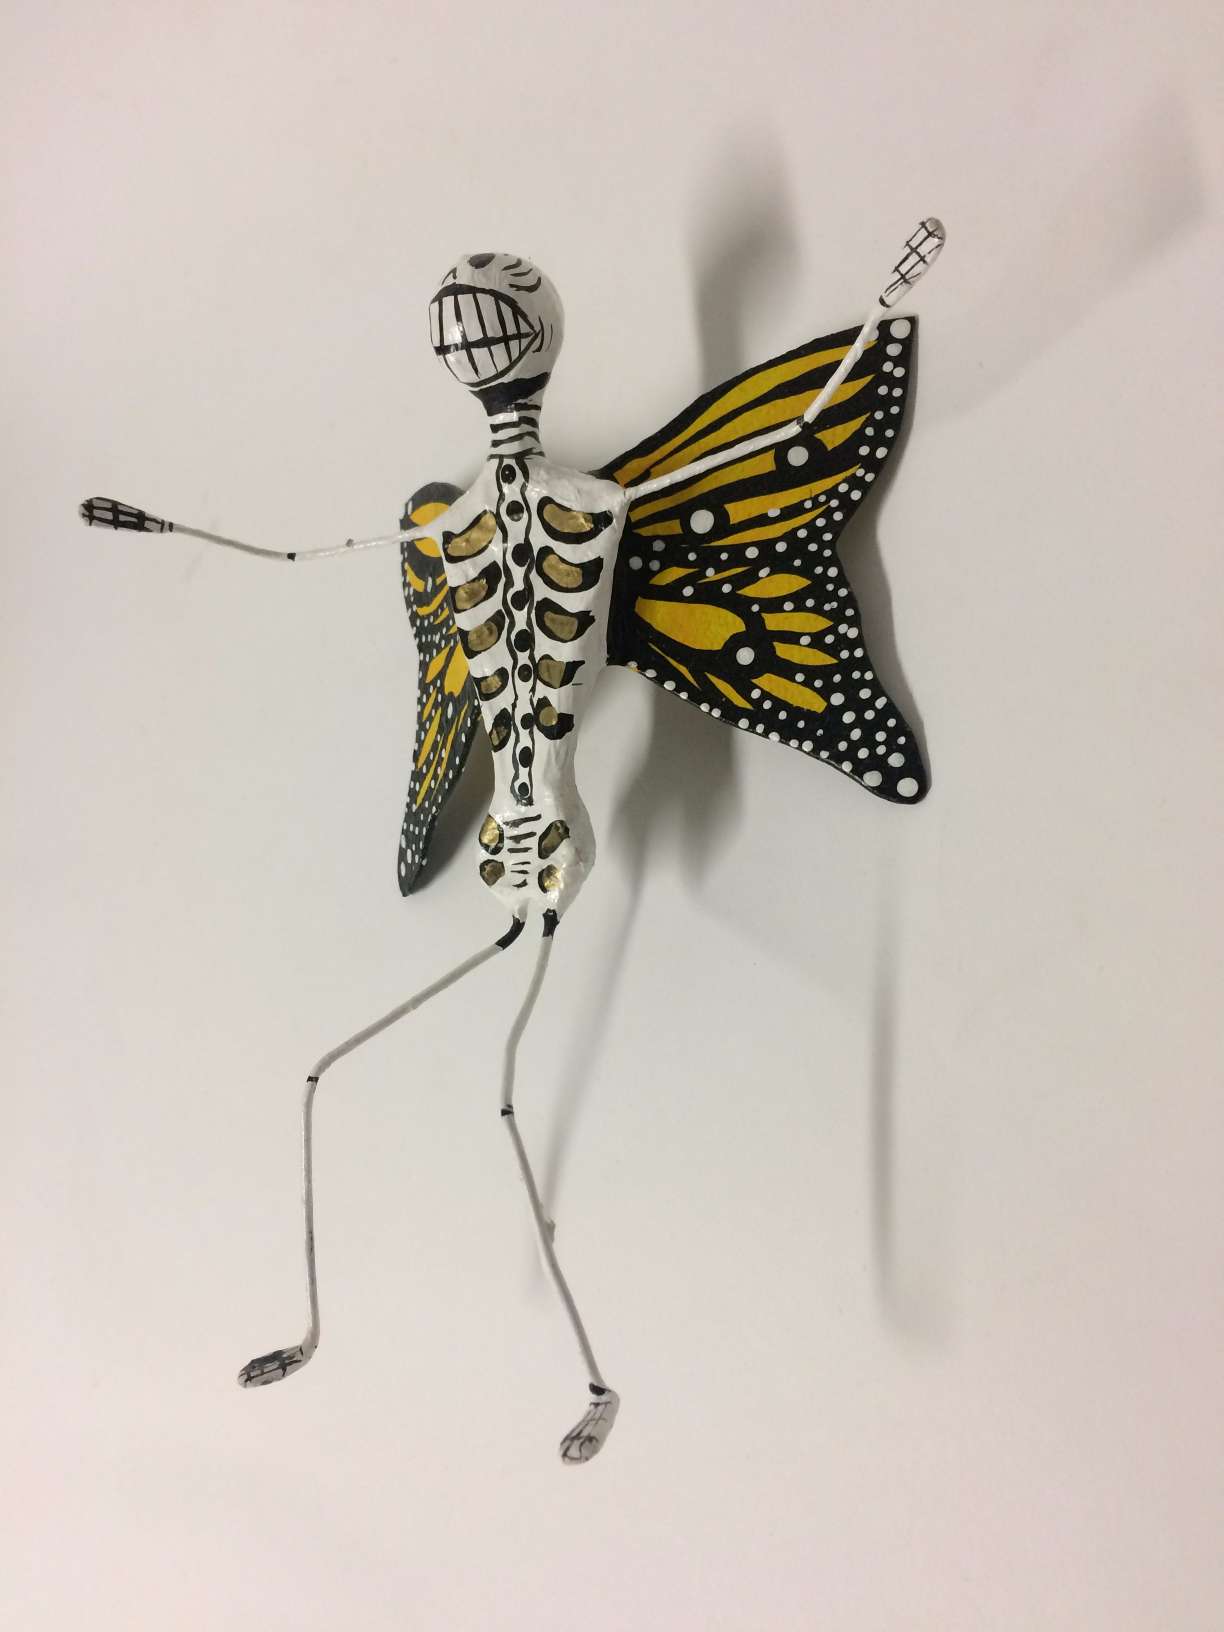 Butterfly Skeleton used to inspire the children on Museum Takeover Day